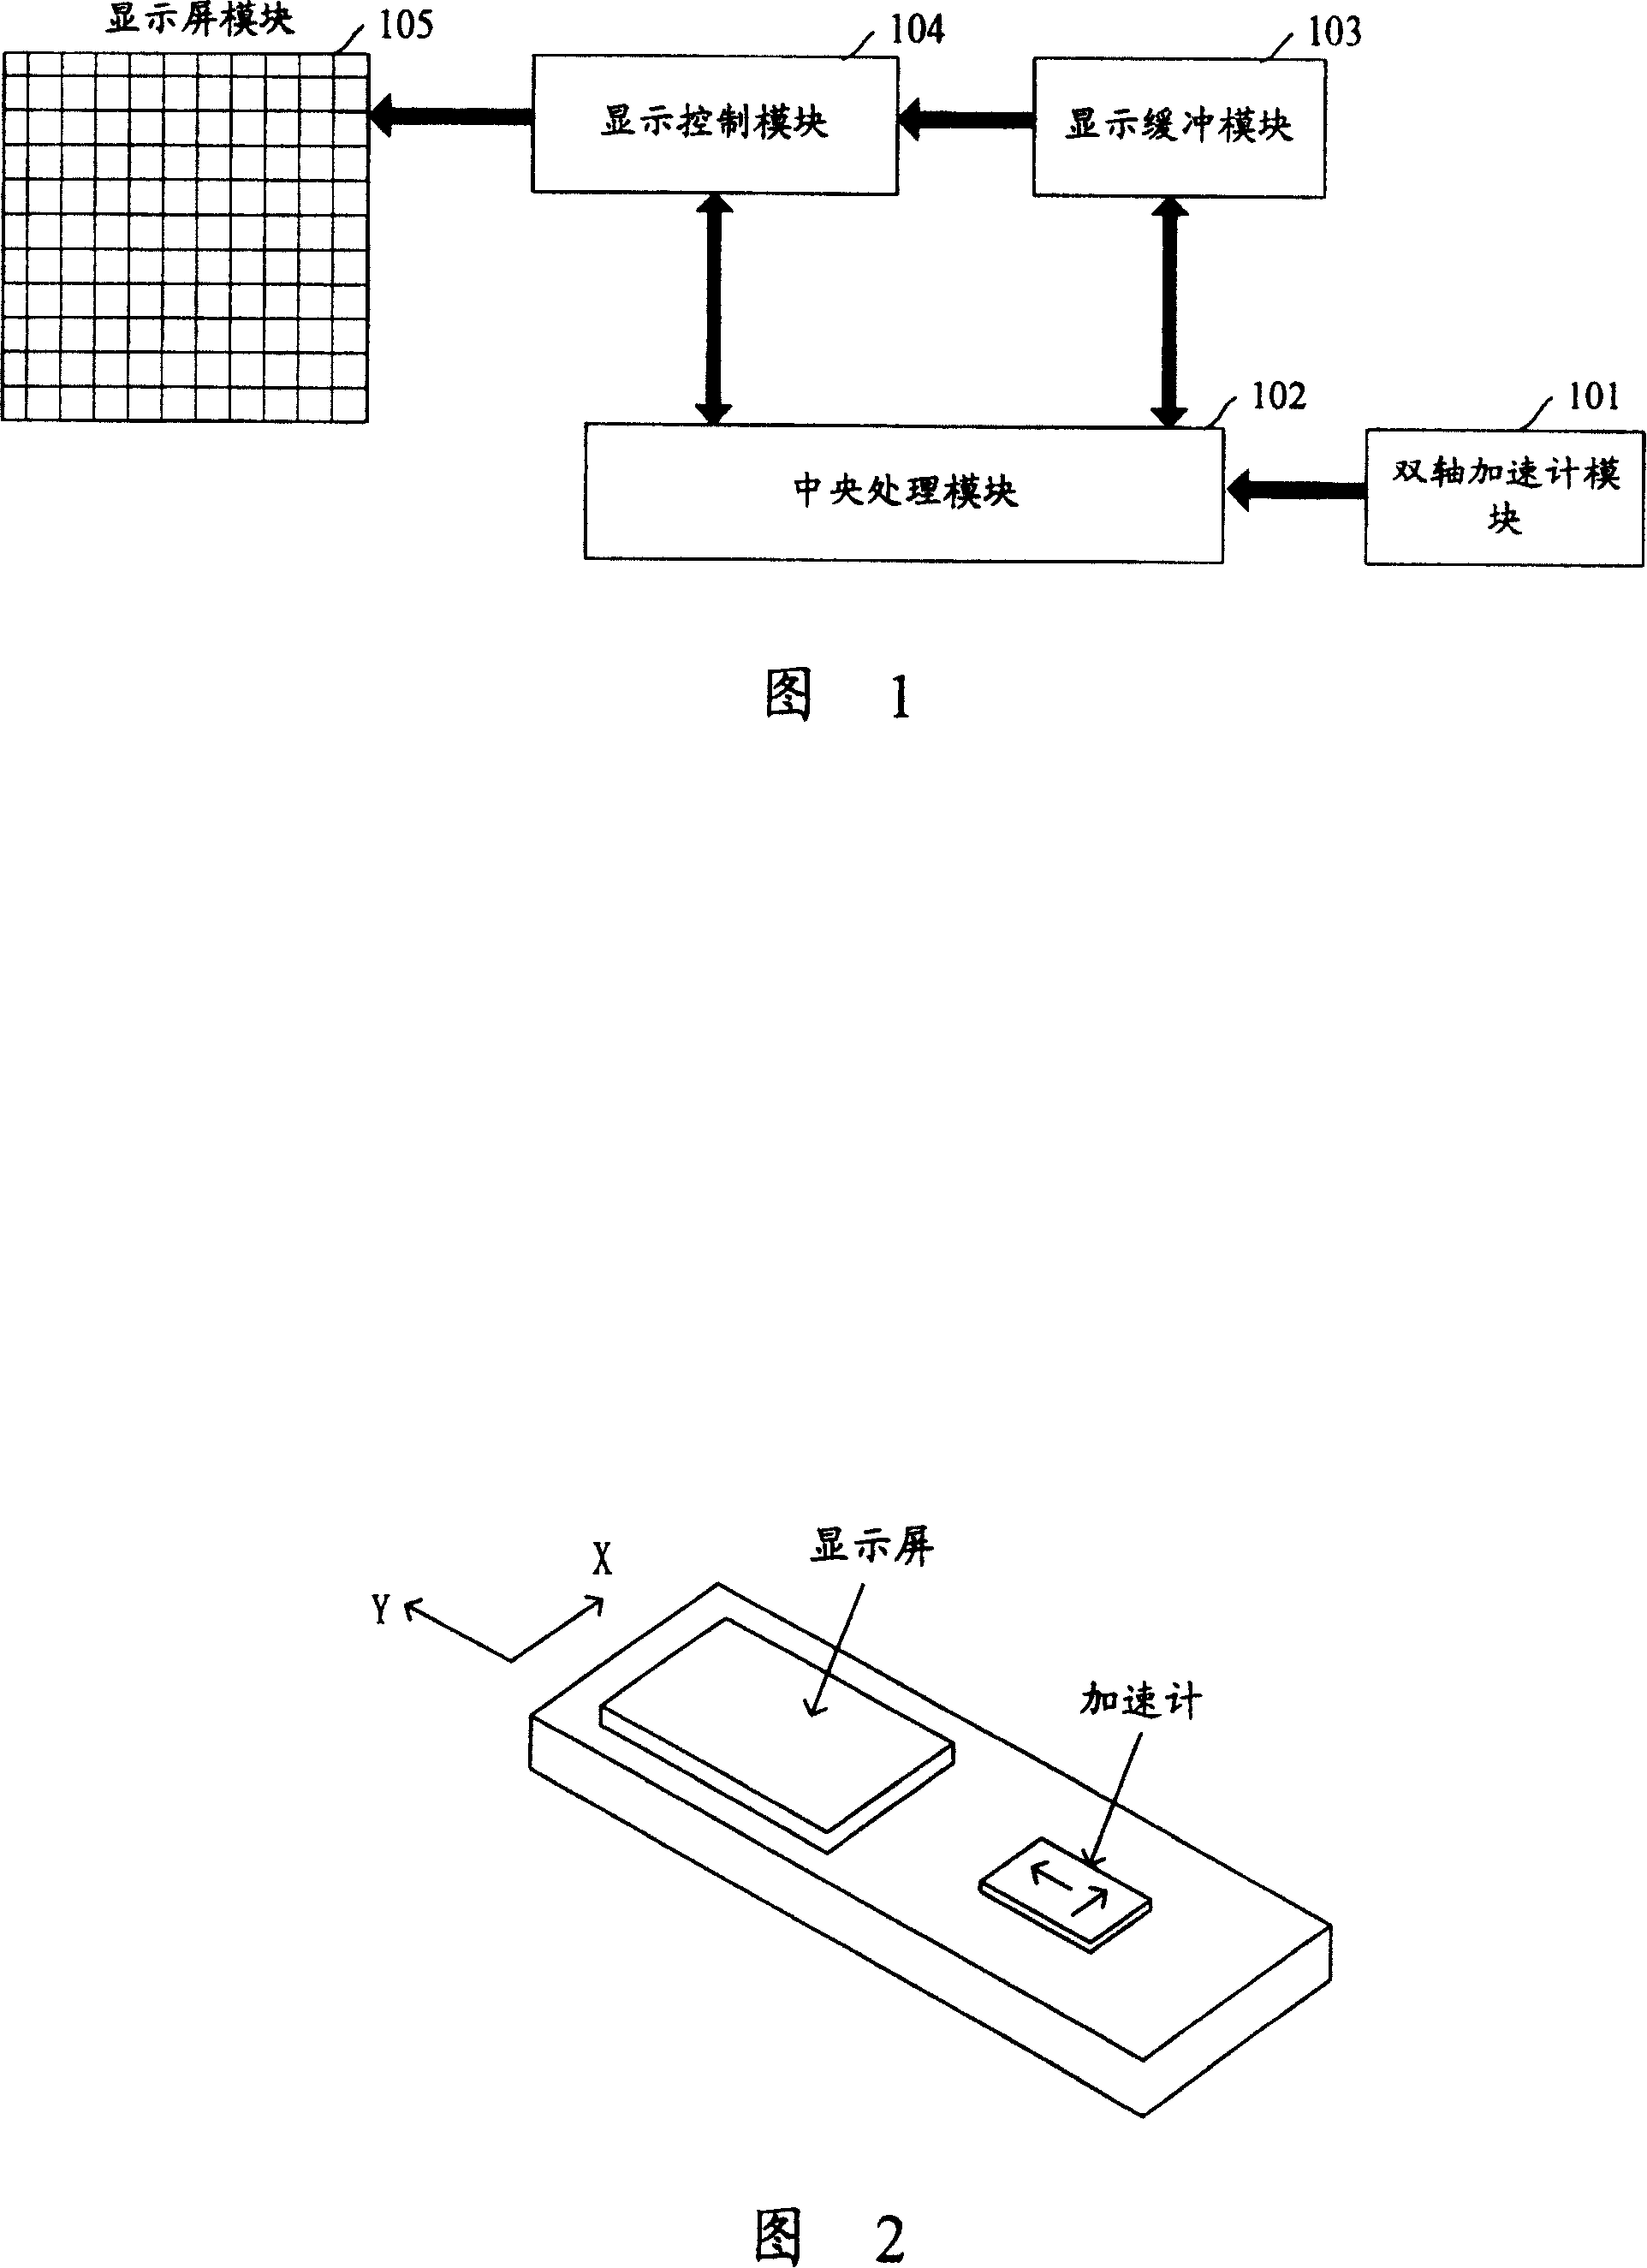 Method and apparatus for displaying information